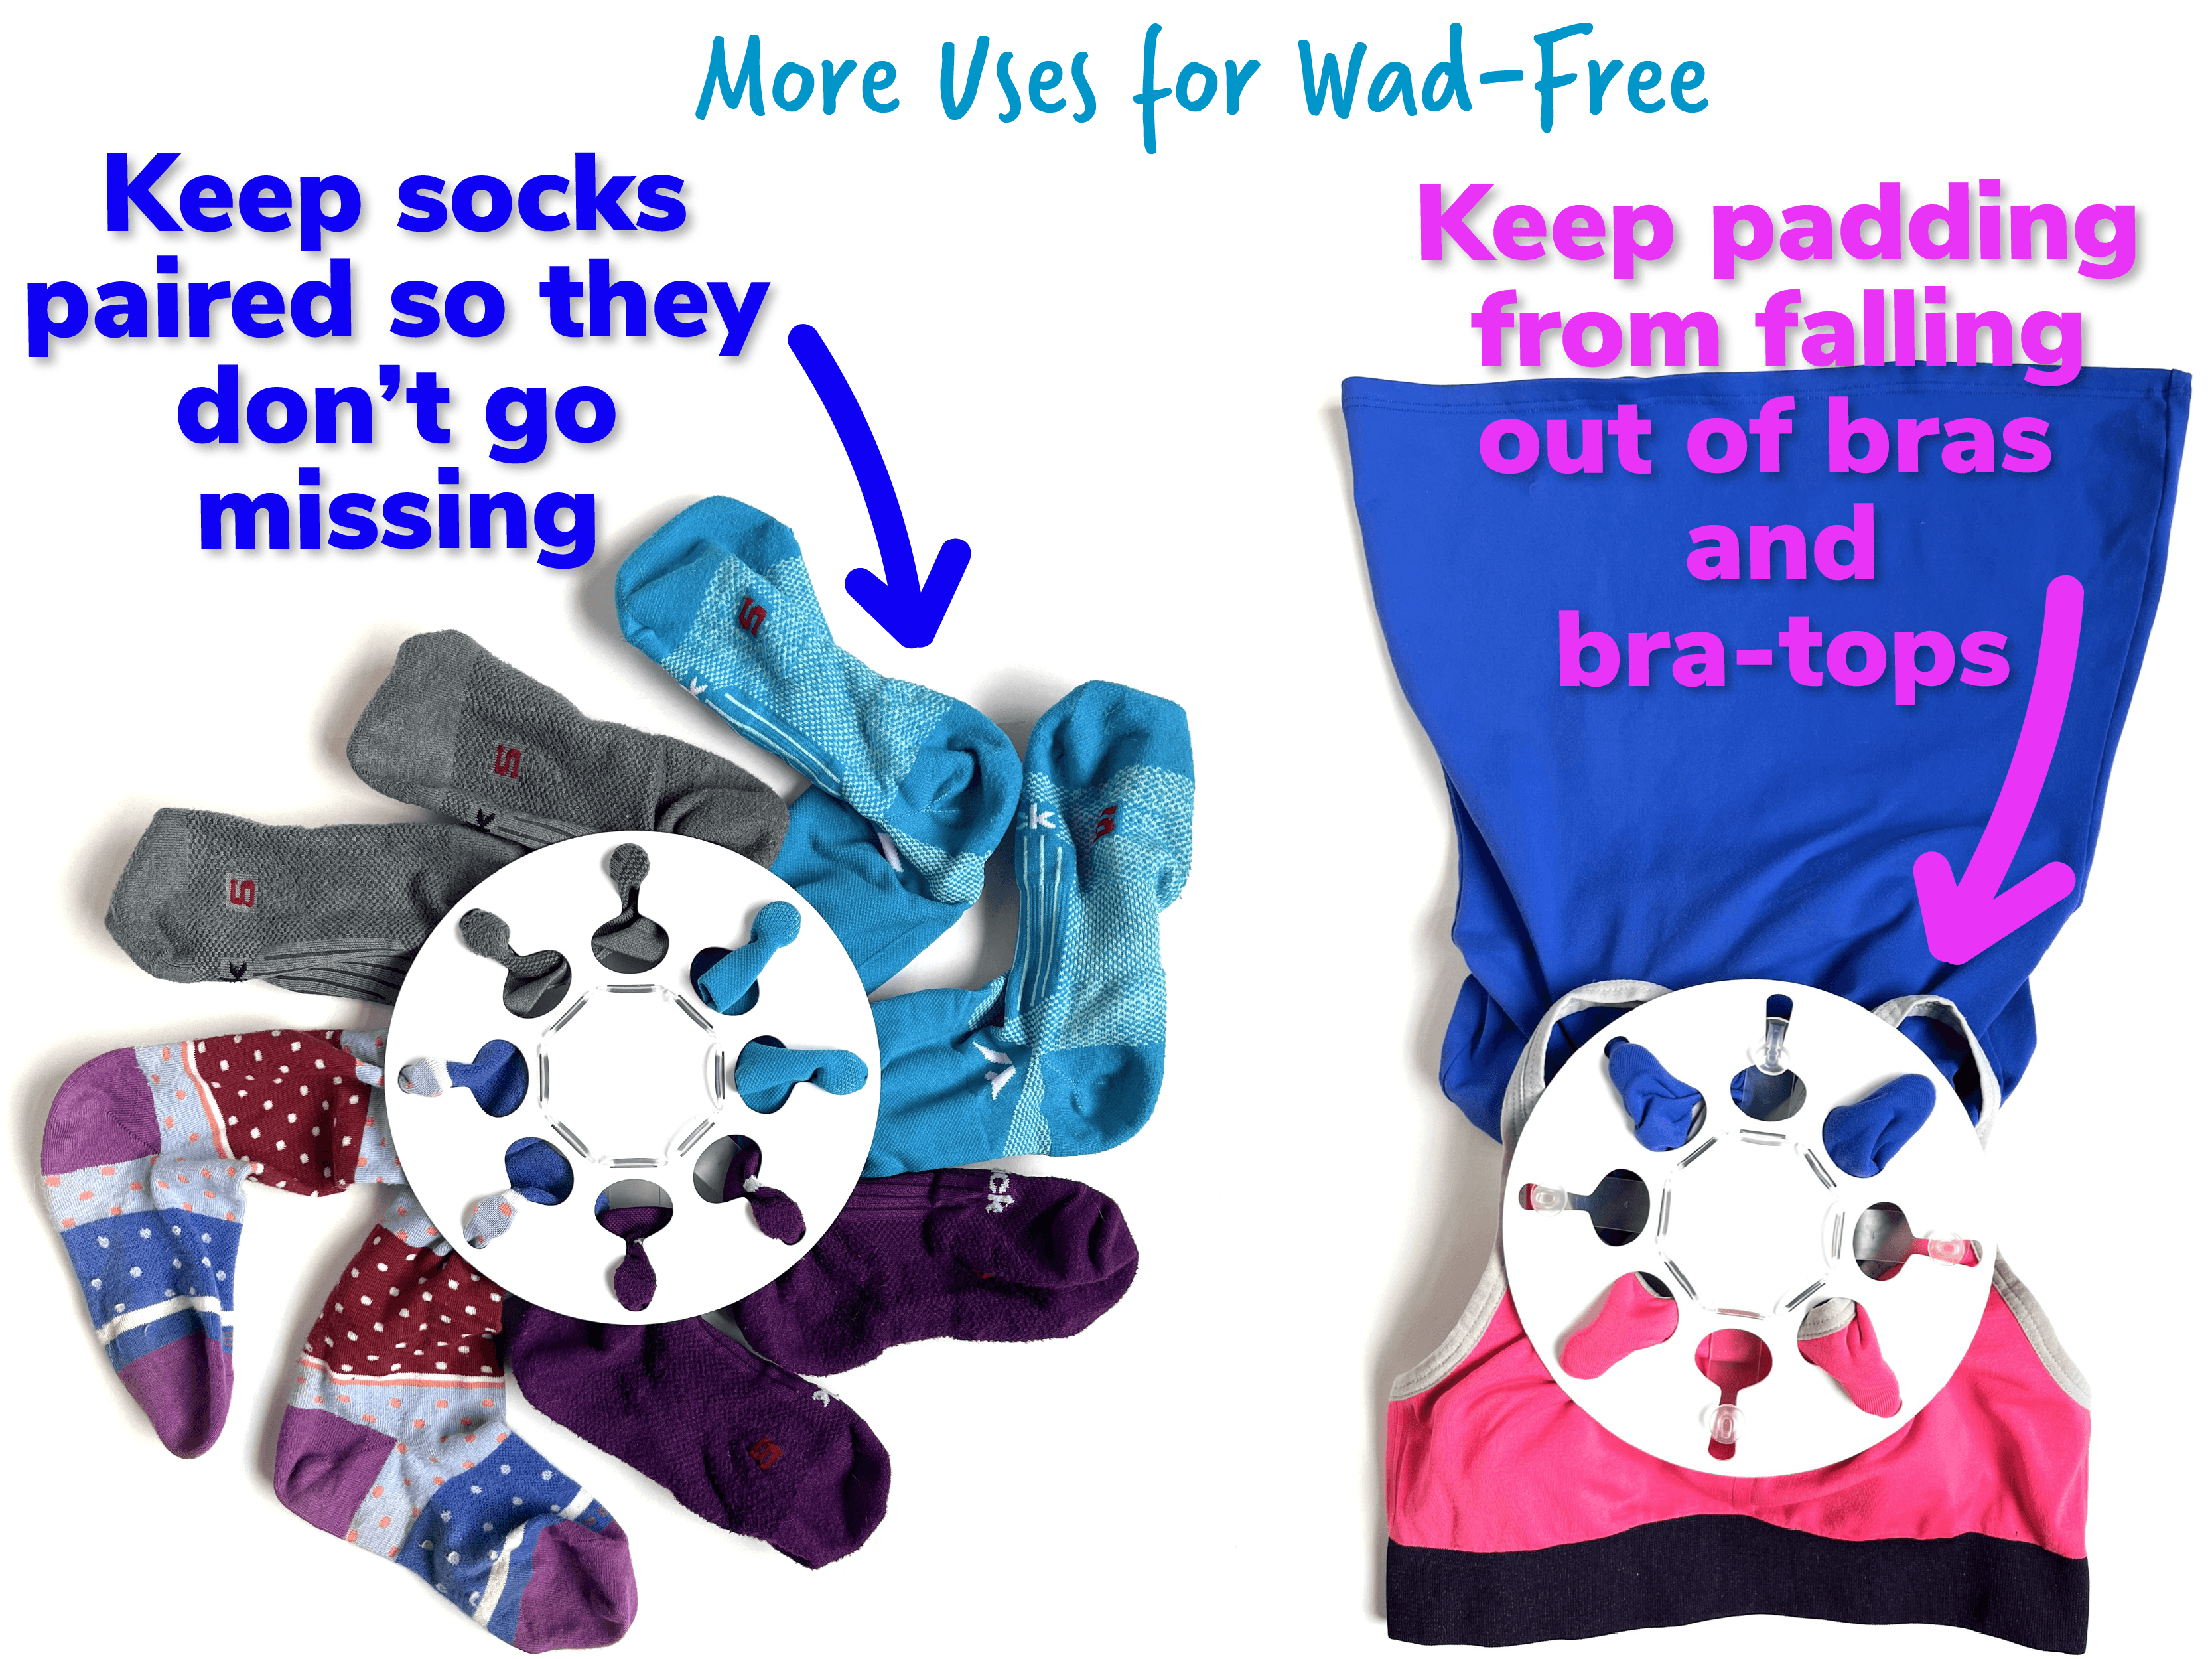 Wad-Free for Bed Sheets - Prevents Tangles and Wads in the Washer and Dryer